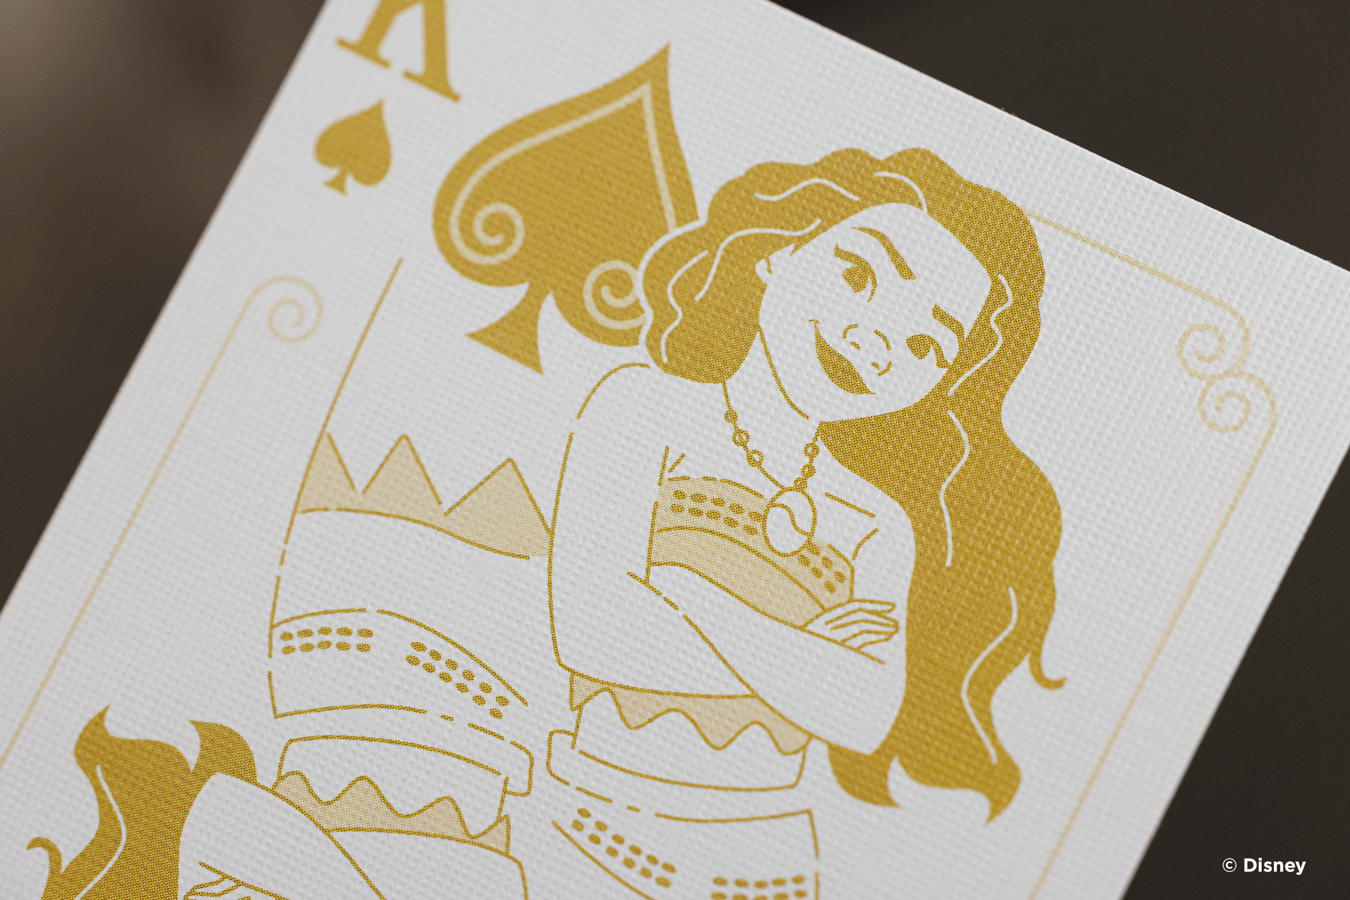 Disney Princess Inspired Playing Cards by Bicycle- Pink